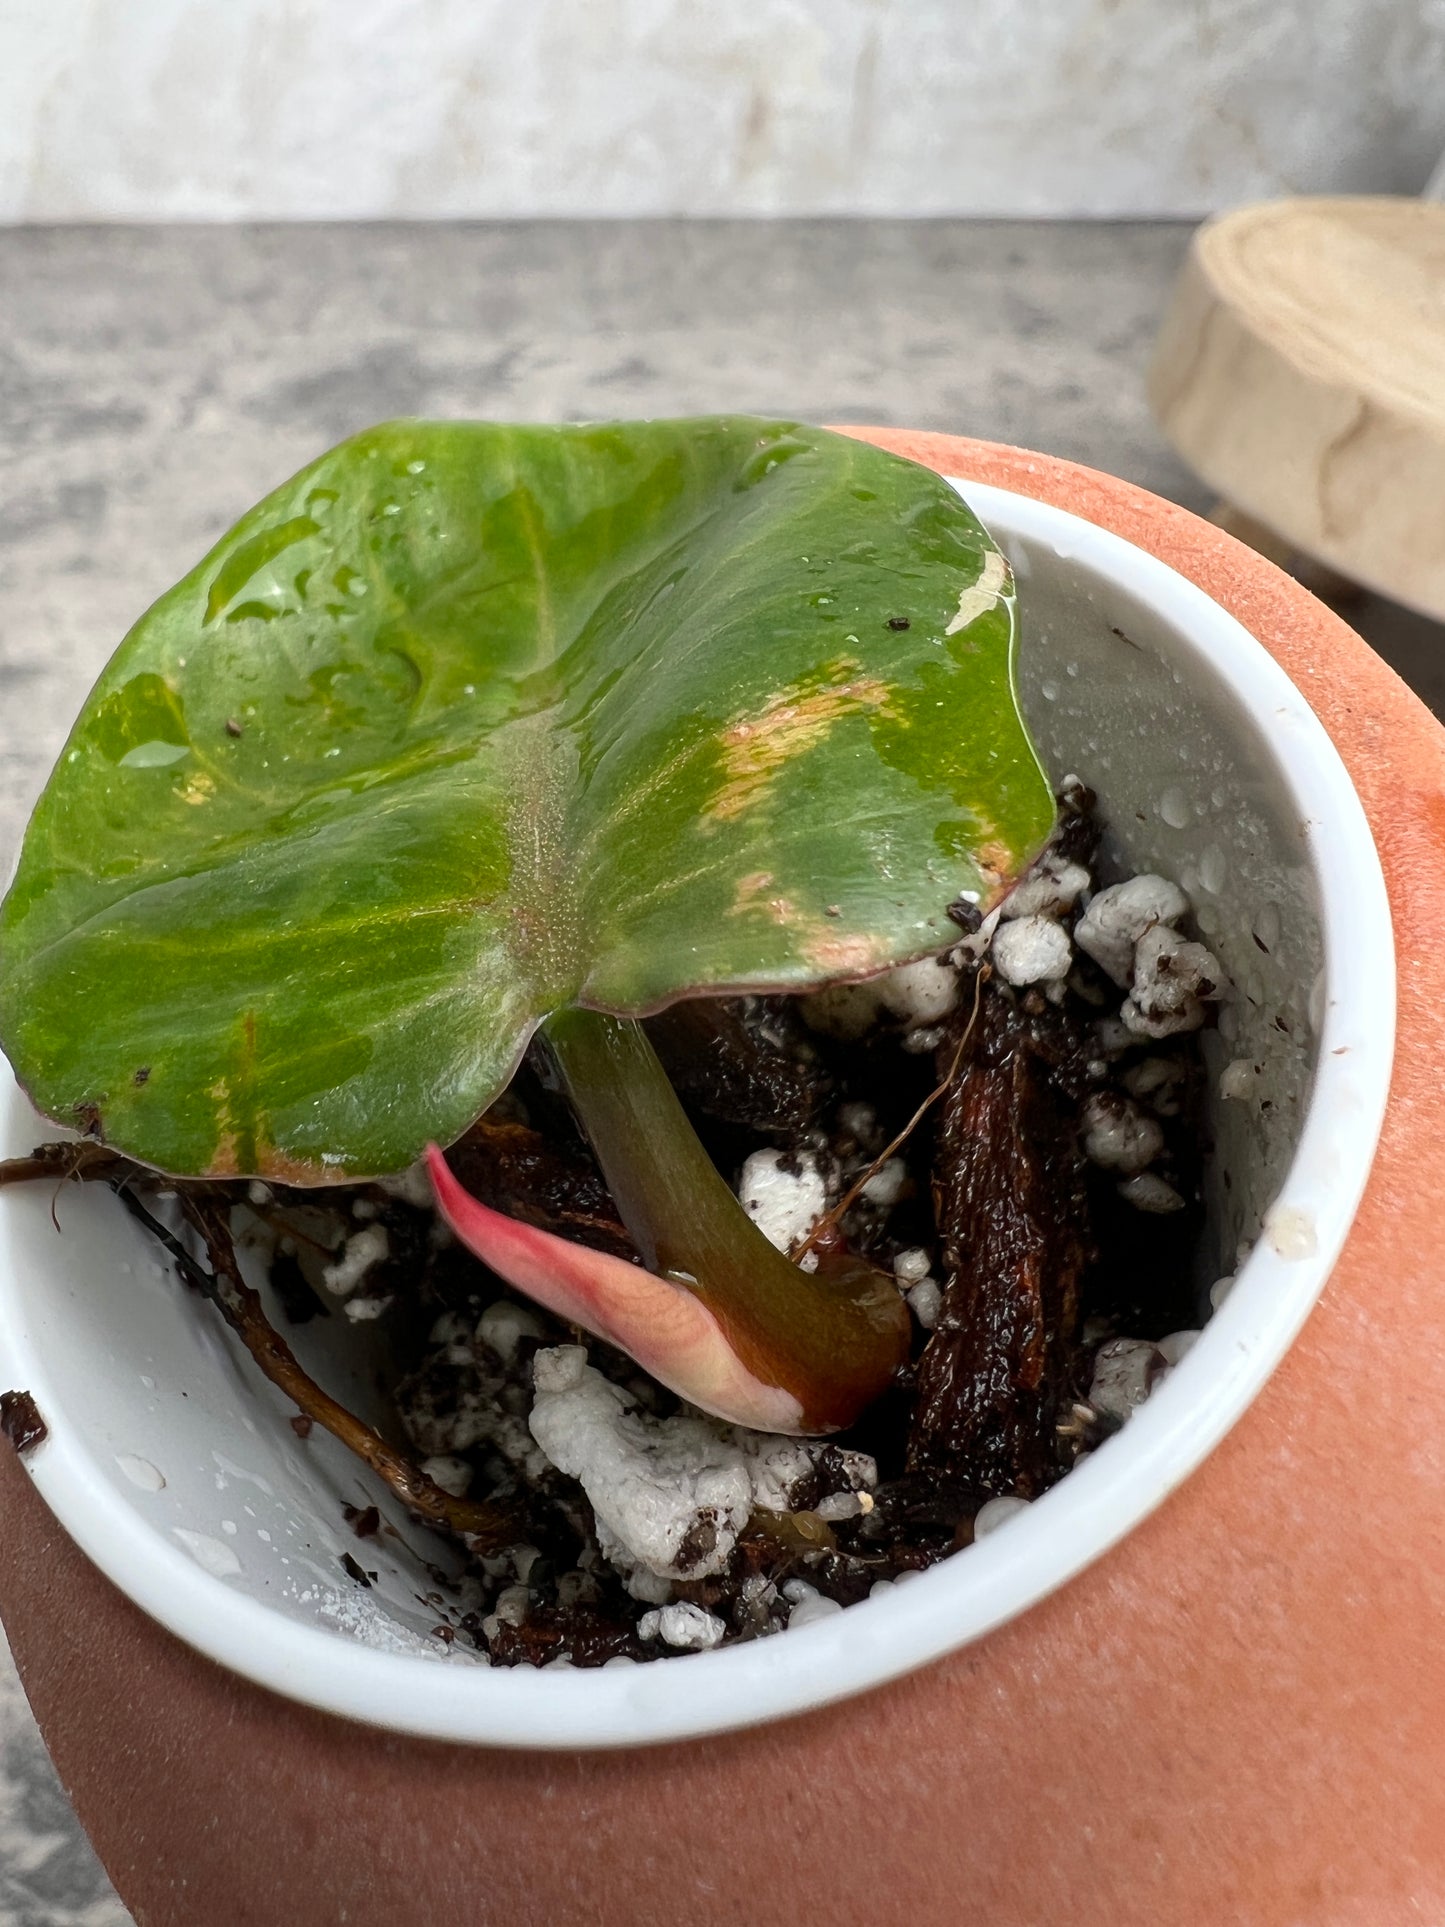 Philodendron white knight tricolor slightly rooted 1 leaf 1 sprout